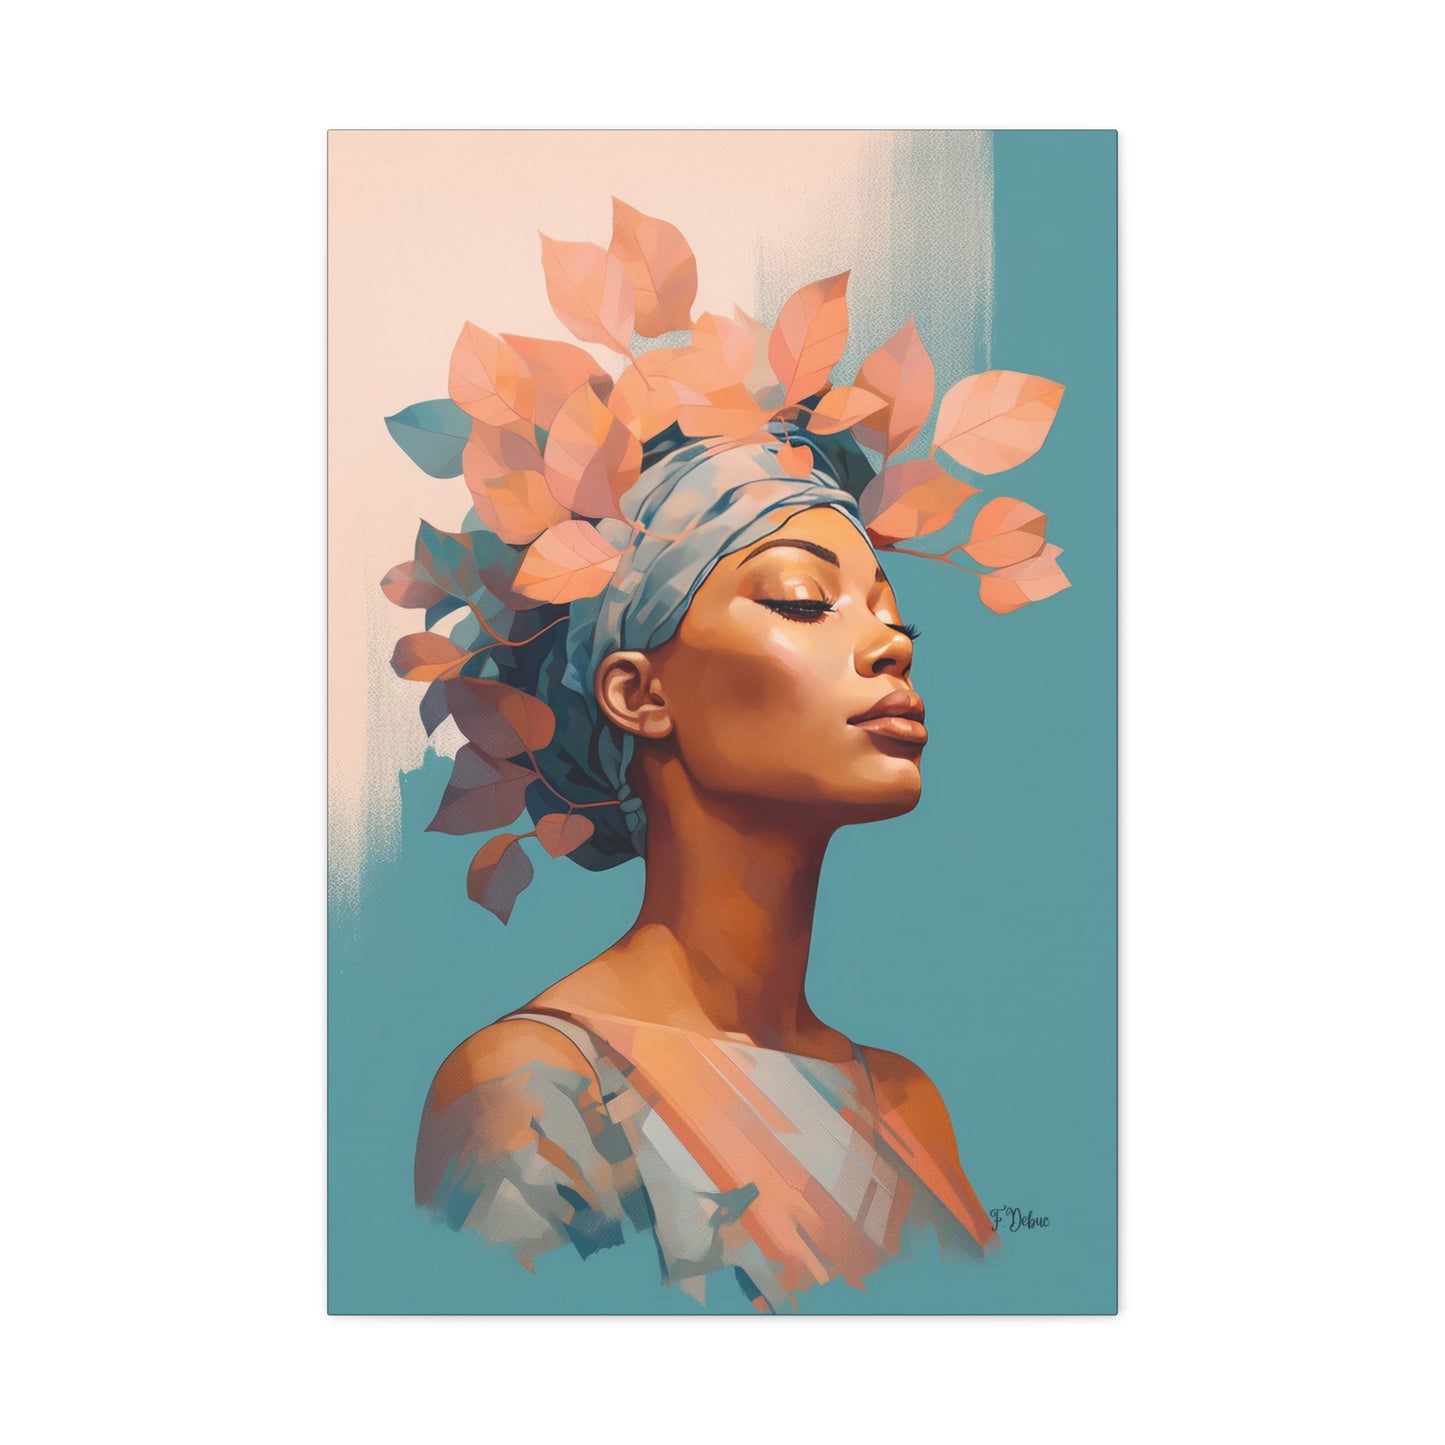 This is the portrait of a  woman with delicate leafy headpiece and minimalist colors embodies the tranquil beauty of nature.